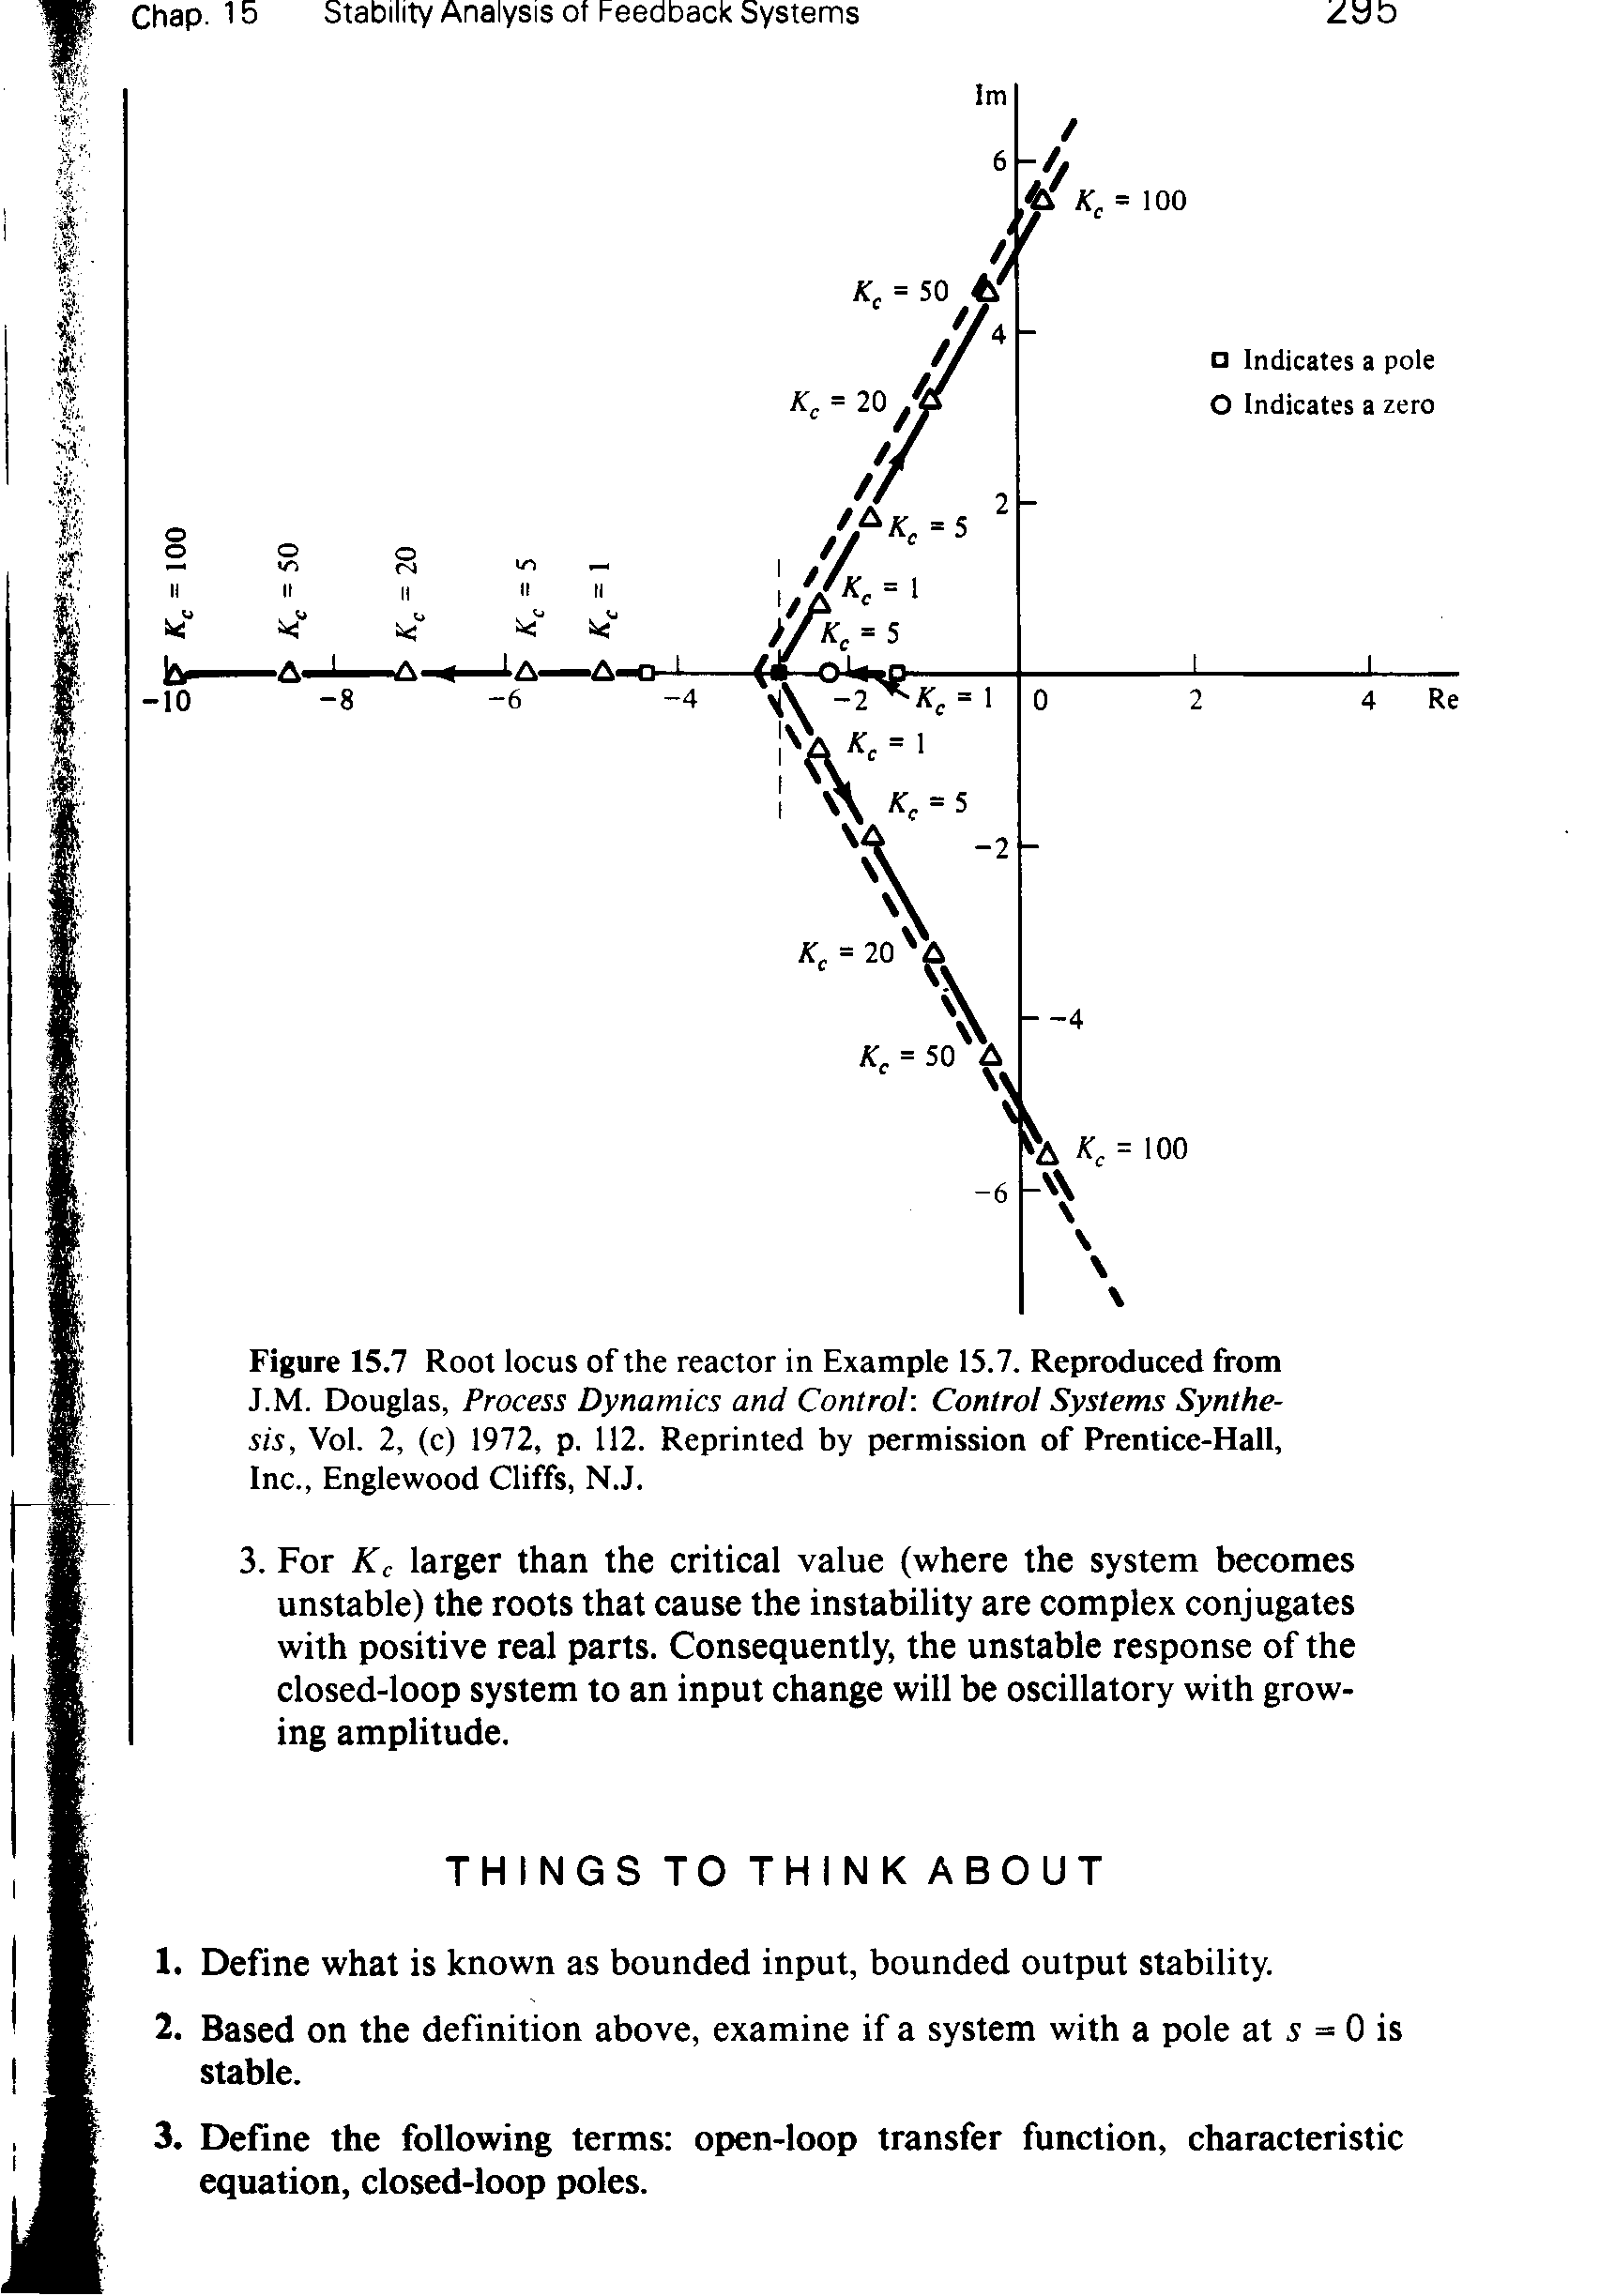 Figure 15.7 Root locus of the reactor in Example 15.7. Reproduced from J.M. Douglas, Process Dynamics and Control. Control Systems Synthesis, Vol. 2, (c) 1972, p. 112. Reprinted by permission of Prentice-Hall, Inc., Englewood Cliffs, N.J.